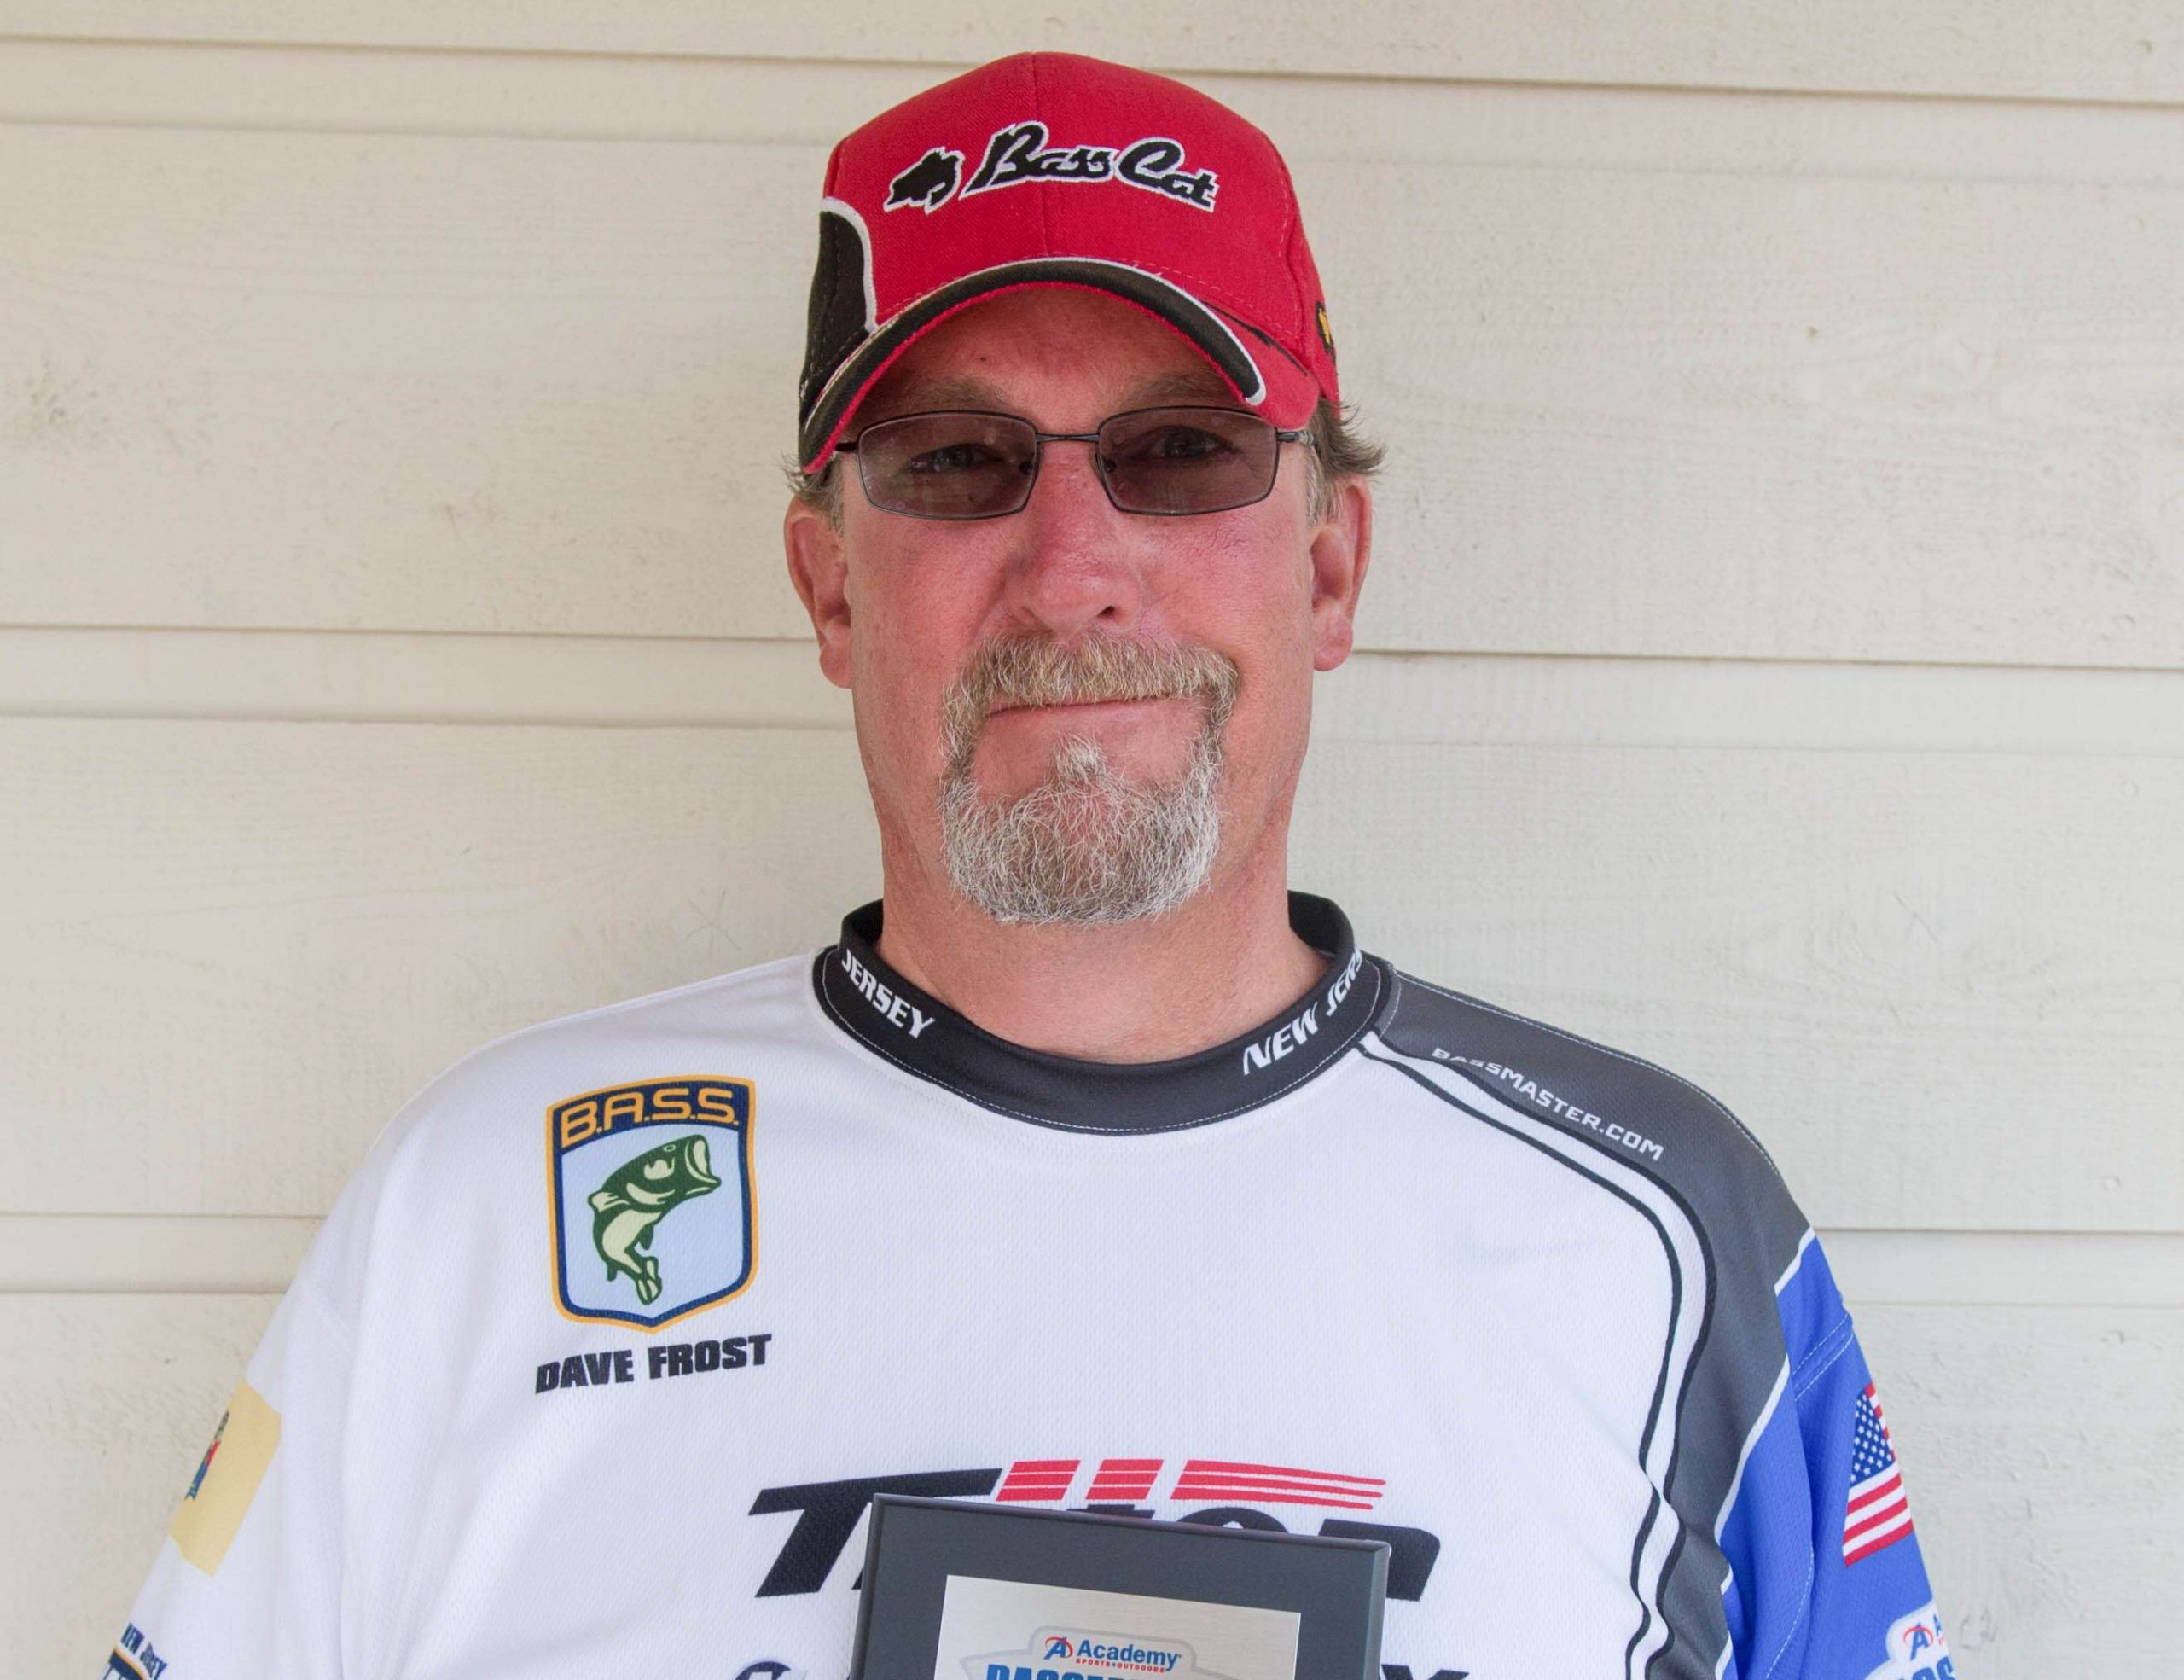 David Frost <br>
New Jersey Nonboater <br>
Dave Frost is a member of the Bucketmouth Brigade and will be representing New Jersey, even though heâs from the neighboring state of â Florida? Thatâs because Frost recently moved to Florida so he can fish year-round. Itâs a move he says has made him a more well-rounded angler. Frost works in furniture service, and in his time off, heâs spends time with Diane, whom he calls his âwonderful and supportive partner.â (Aw!) Heâs sponsored by Enigma, Basscat Boats, Lowrance, MotorGuide, Minn Kota, Mega Strike, Mare Marine VA and the New Jersey B.A.S.S. Nation. 